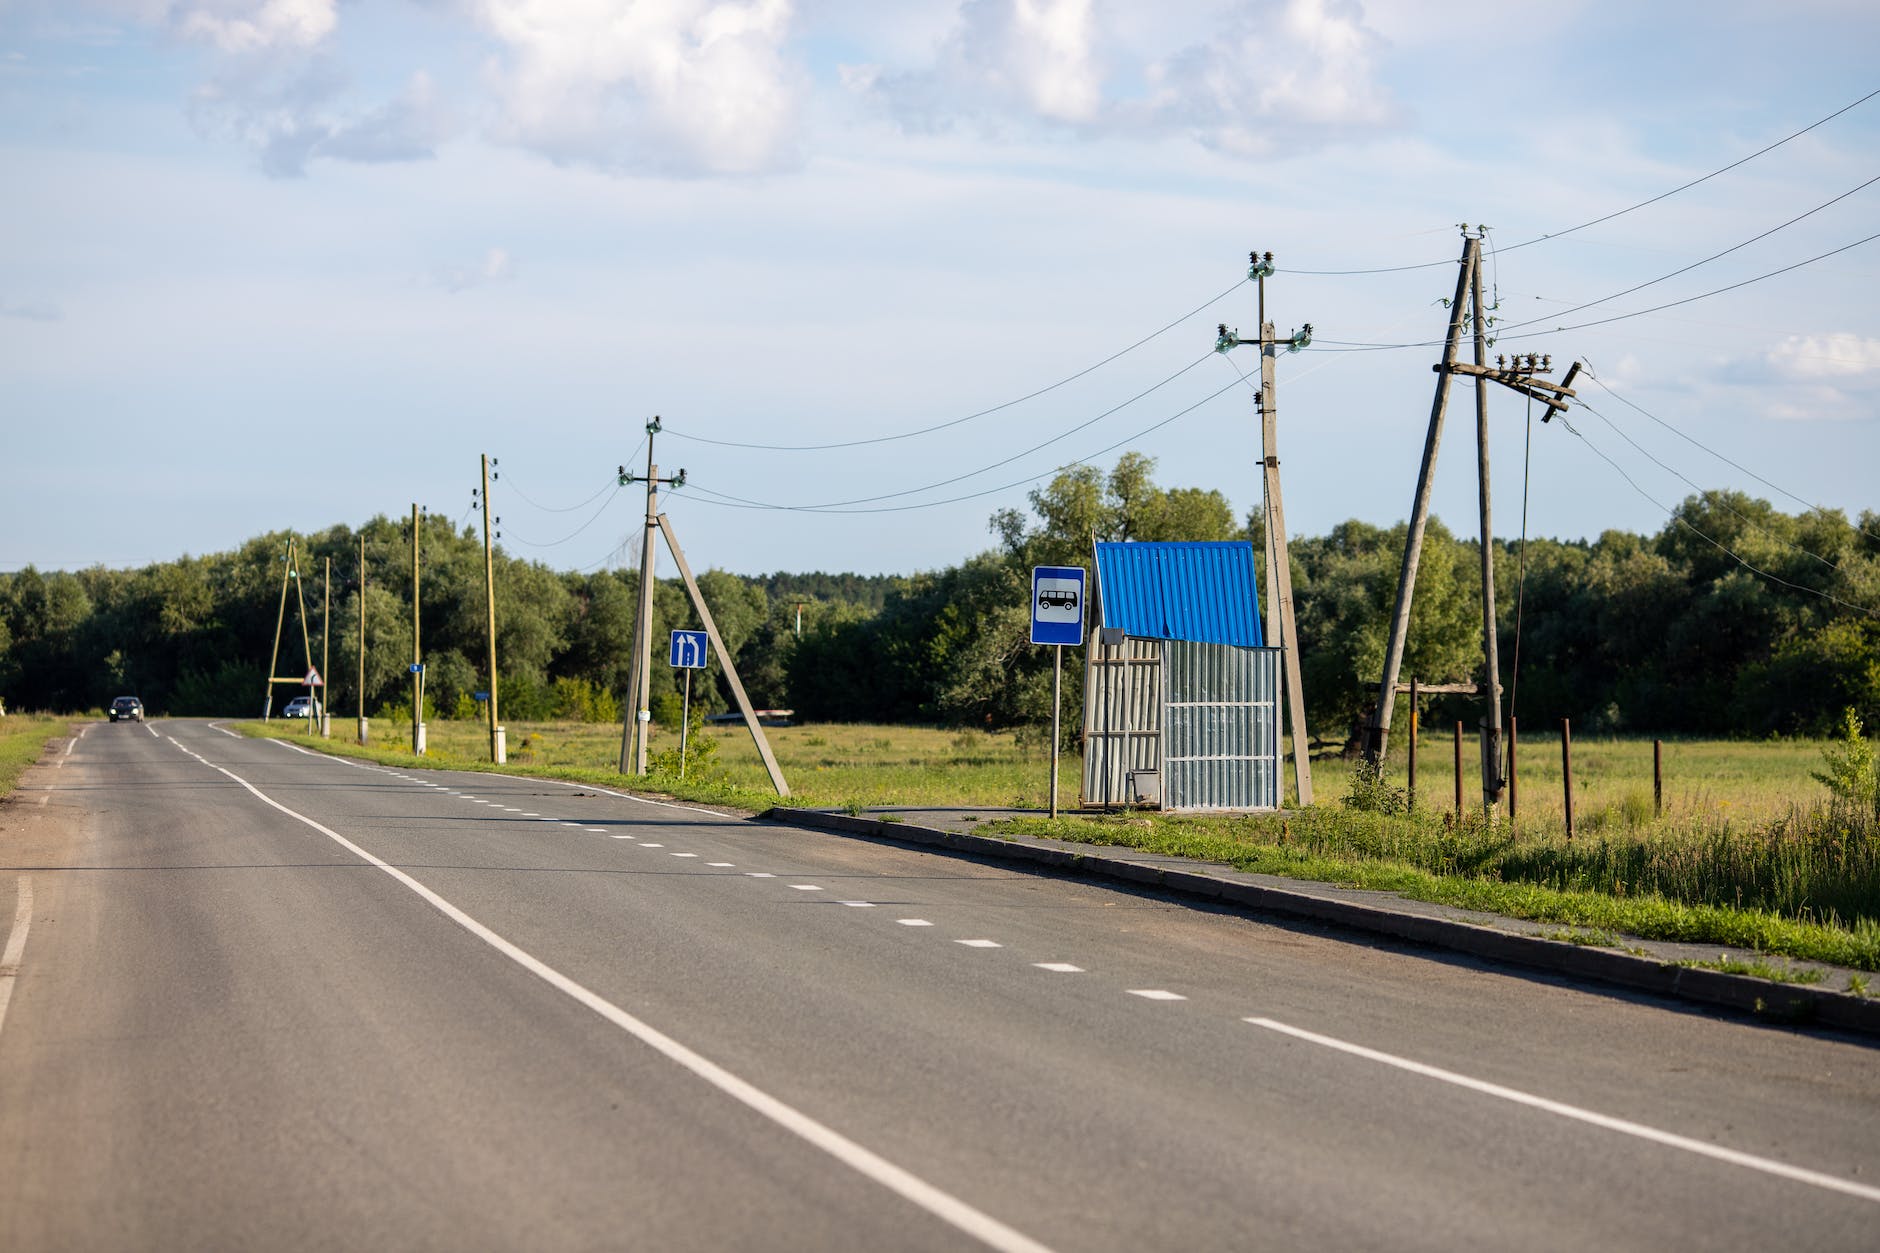 utilities for moving away photo of a road near signages and utility poles